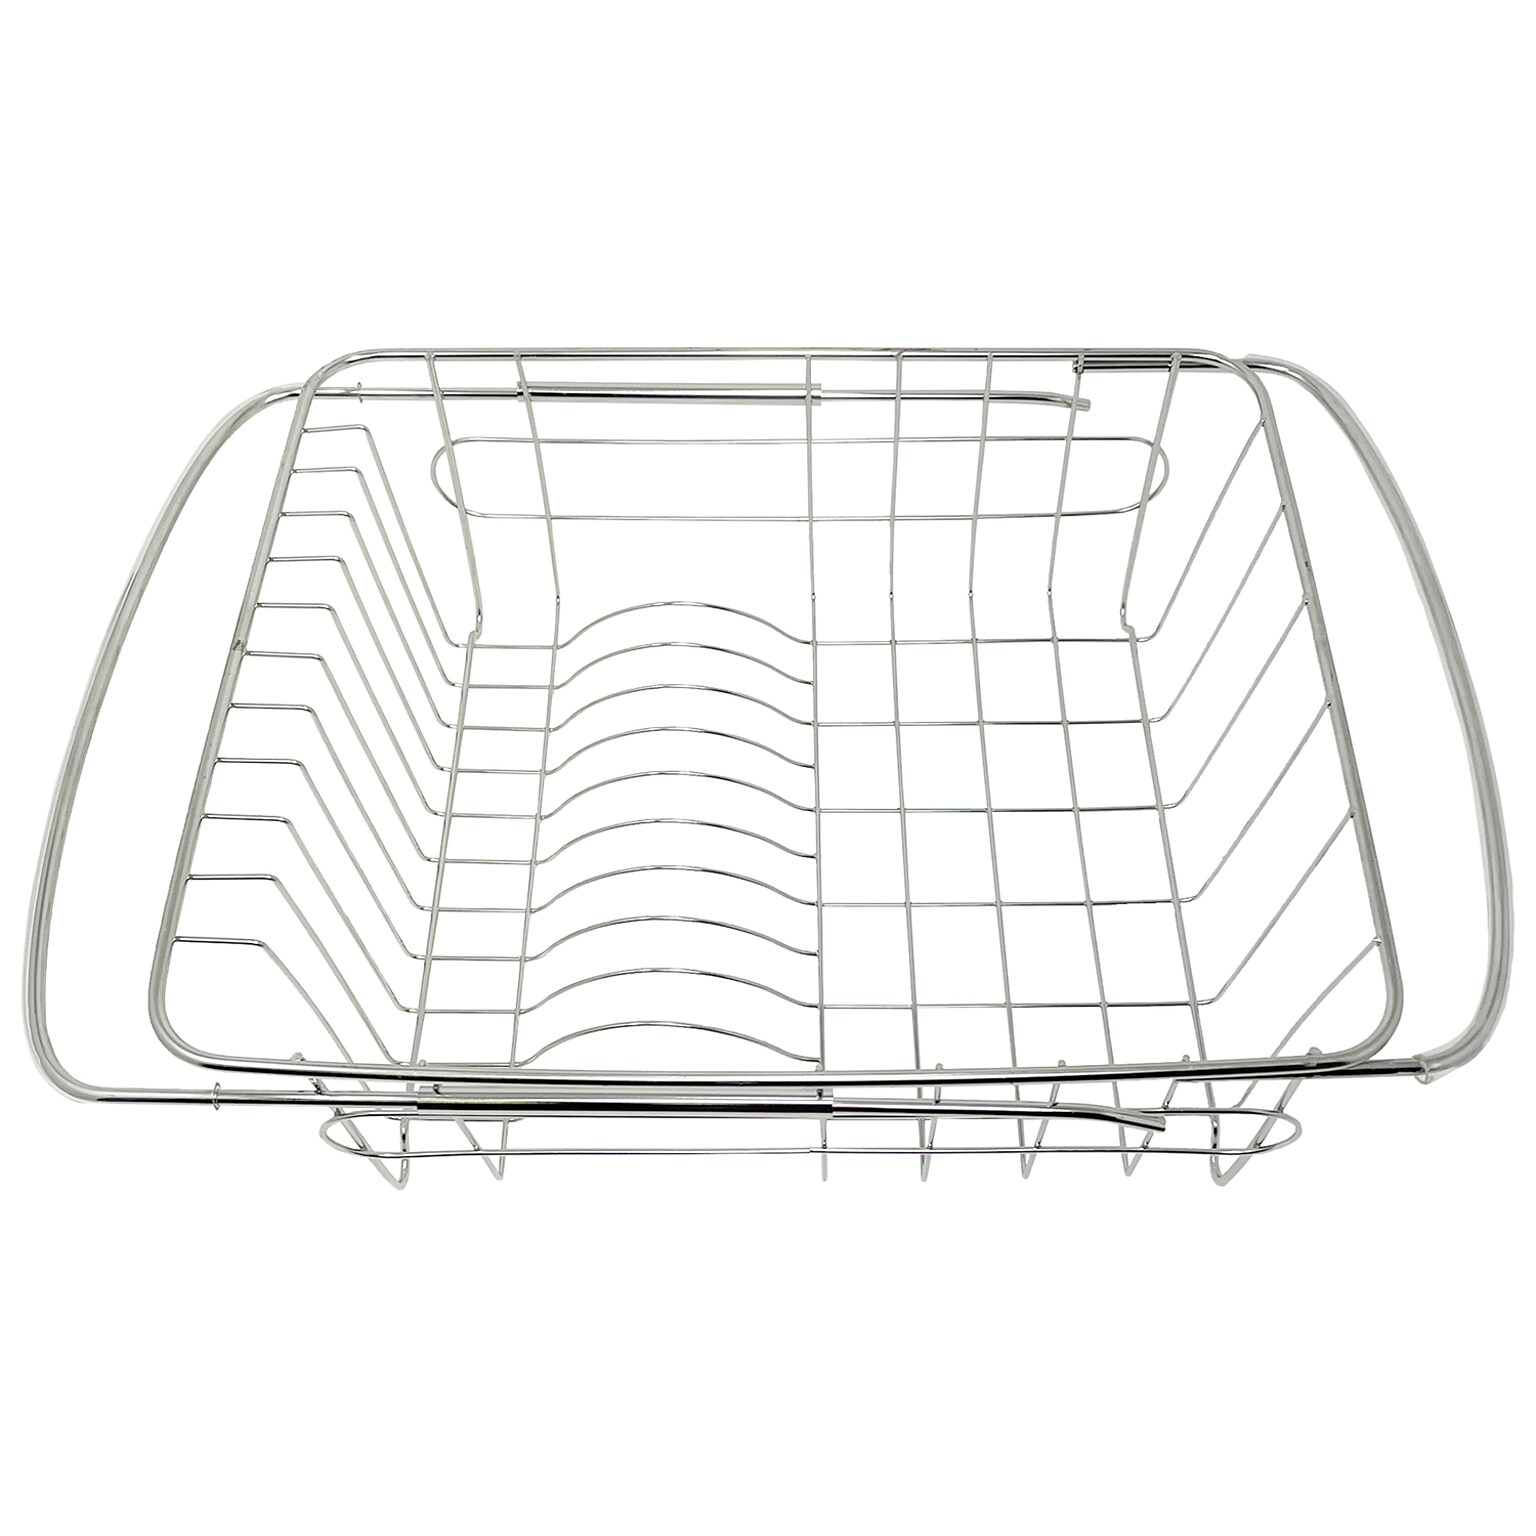 Better Houseware Over-the-Sink Stainless Steel Adjustable Dish Drainer, Silver (1423)